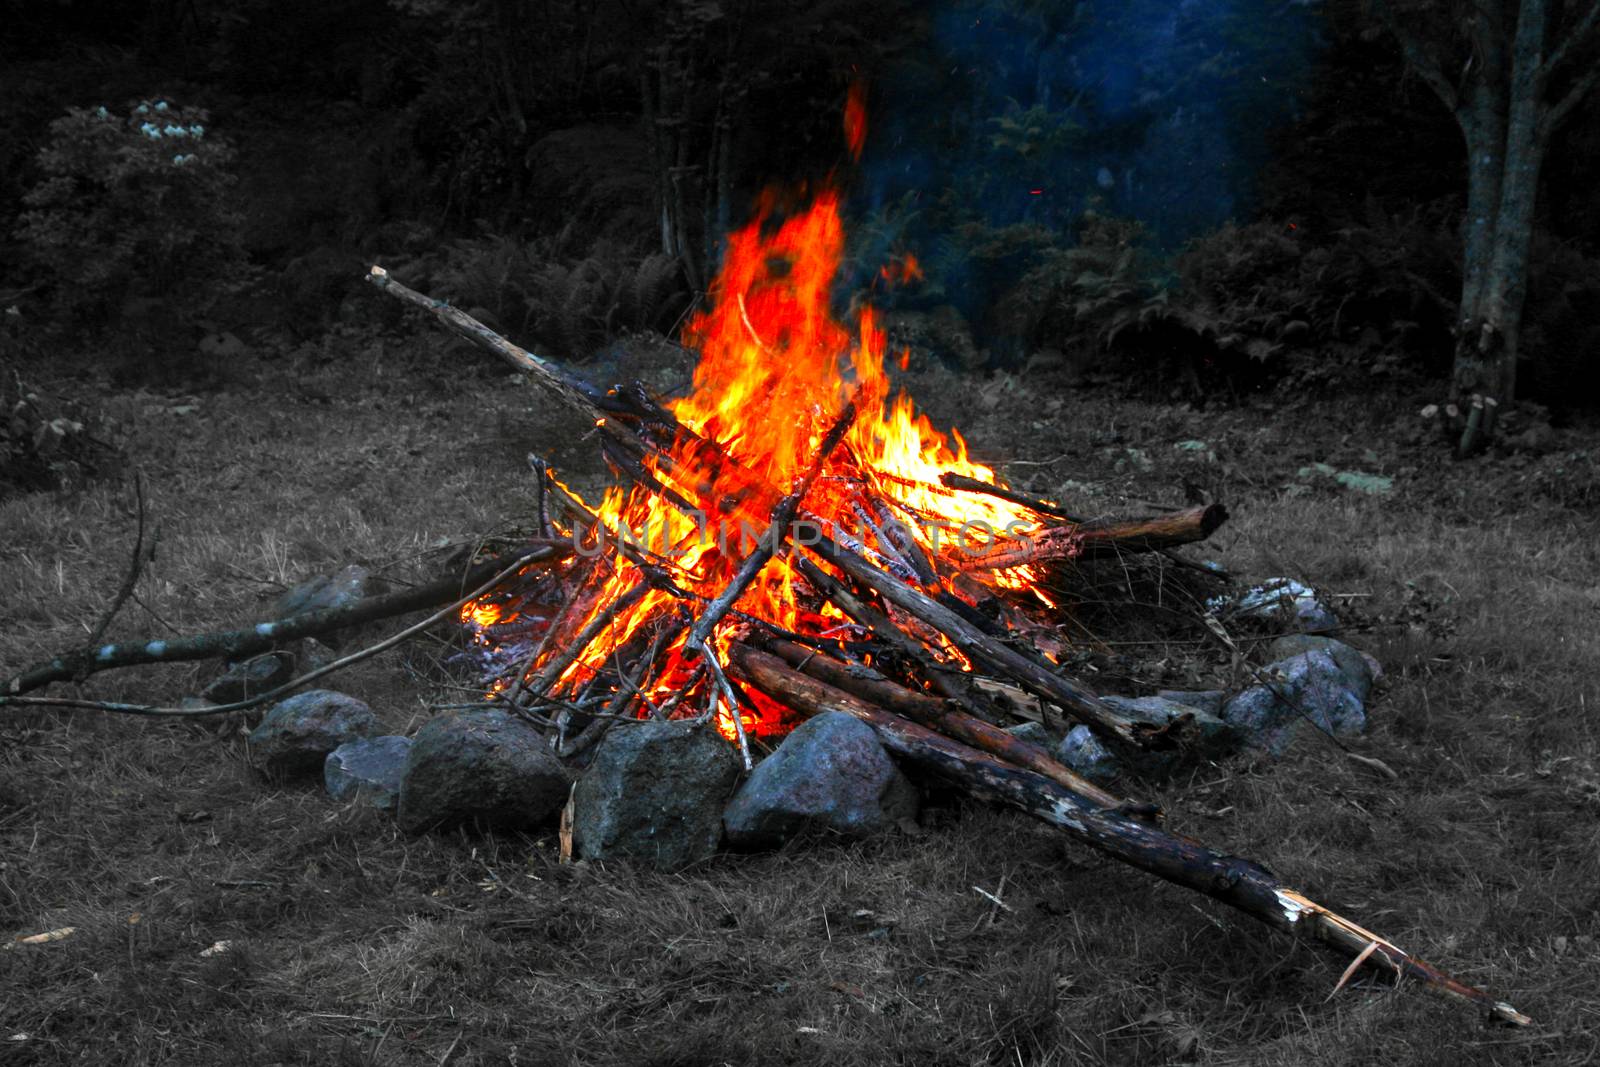 Saturated bonfire, black and white background.